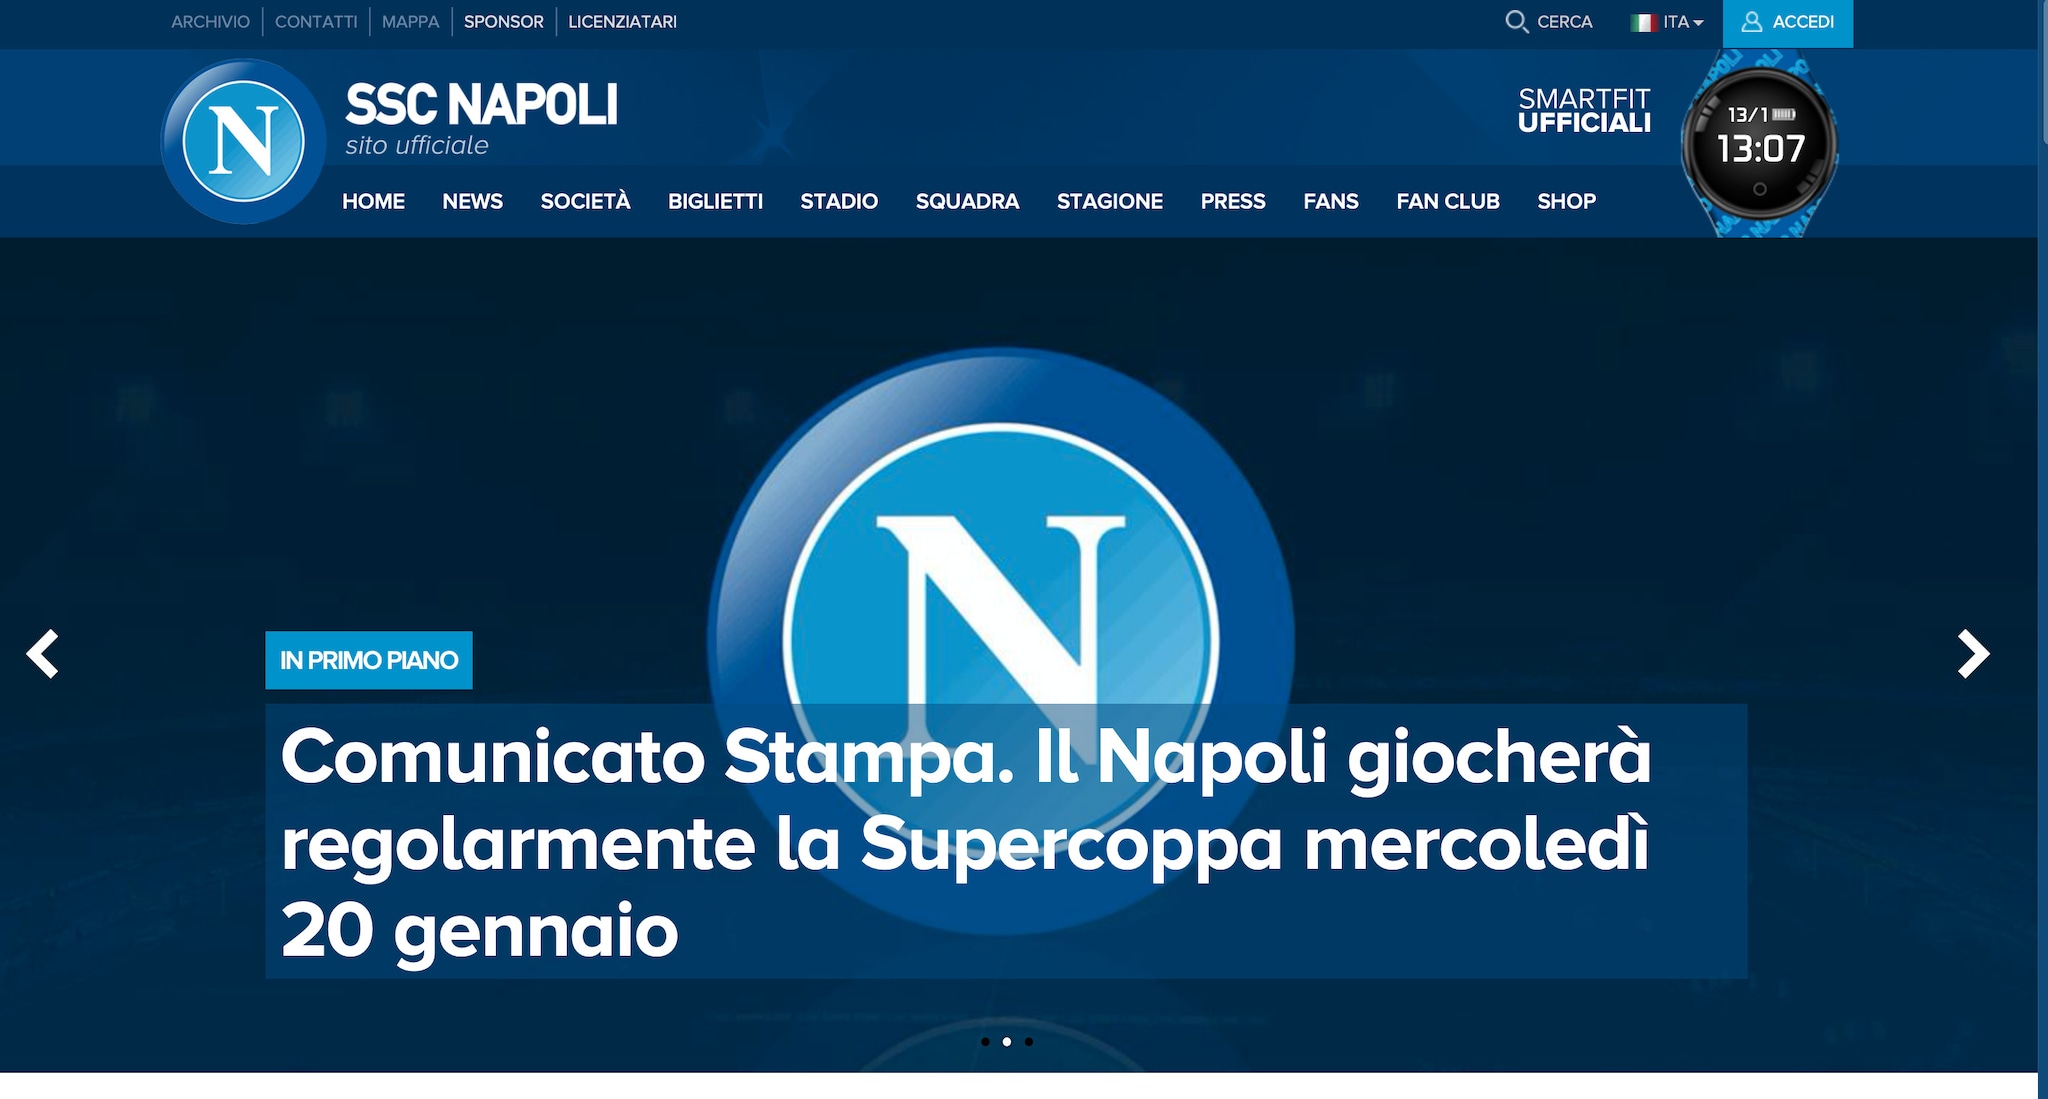 Napoli will play the Super Cup